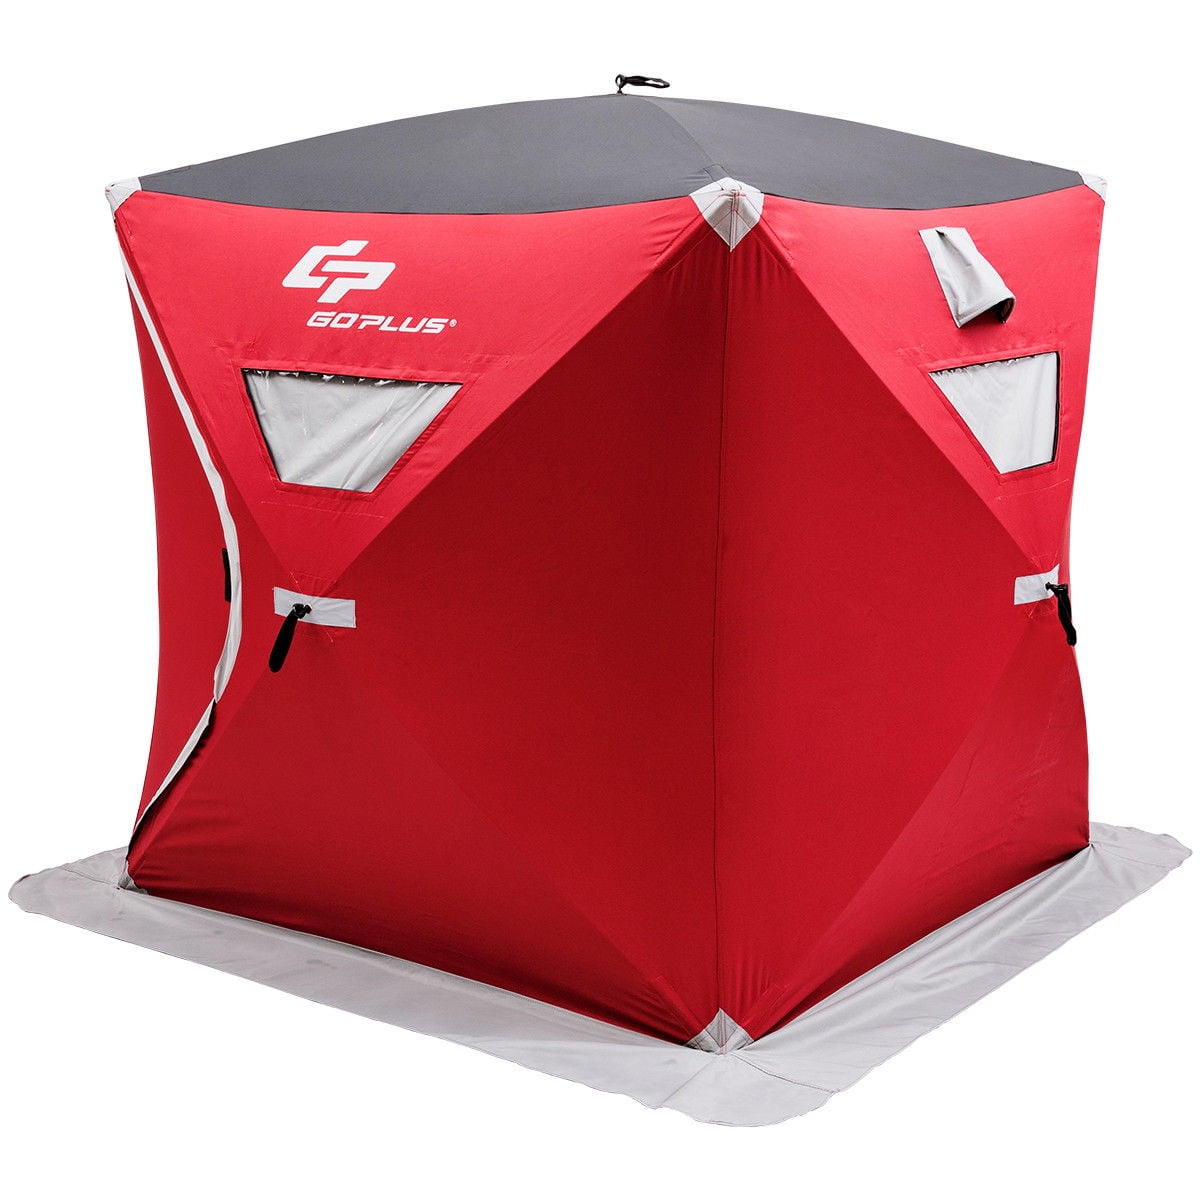 Frabill Incredibly LightWeight Ice Fishing Shelter Hub Hq200 